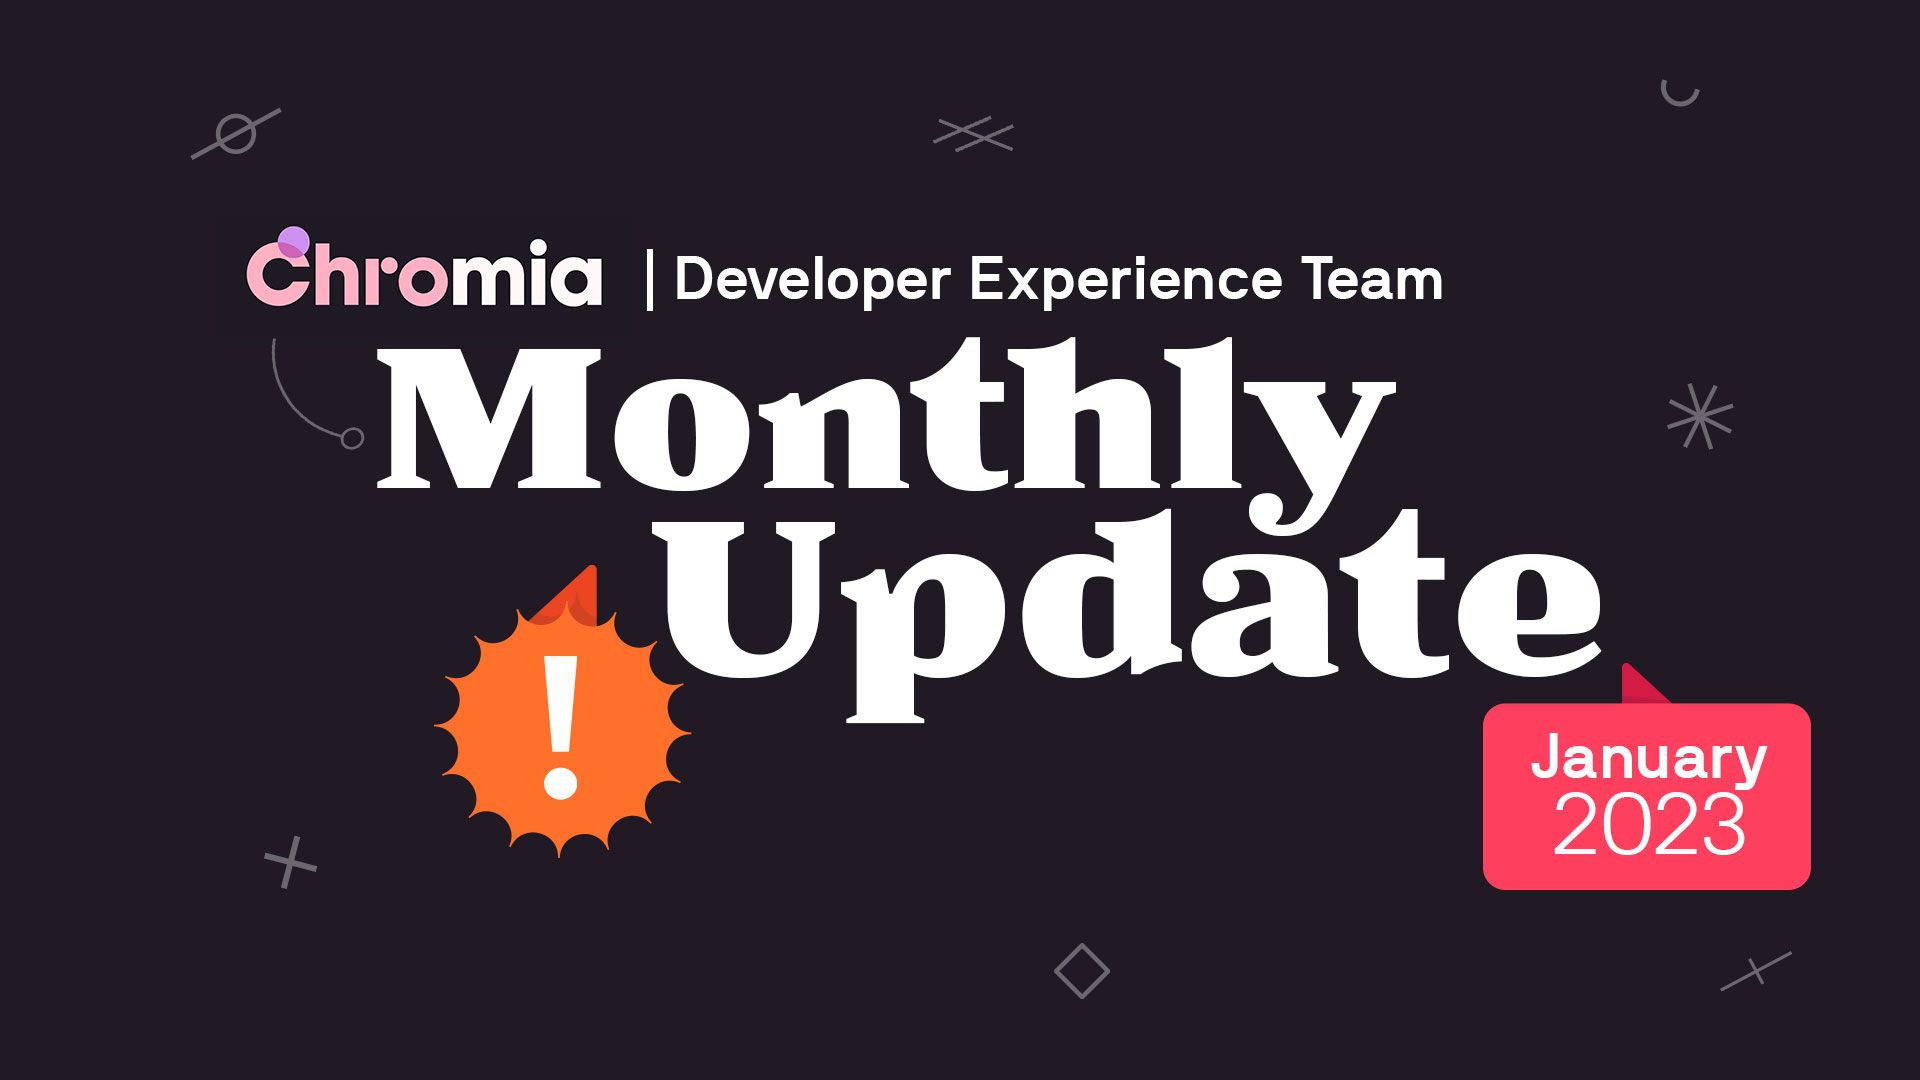 Developer Experience Team - Monthly Update #1 (January 2023)